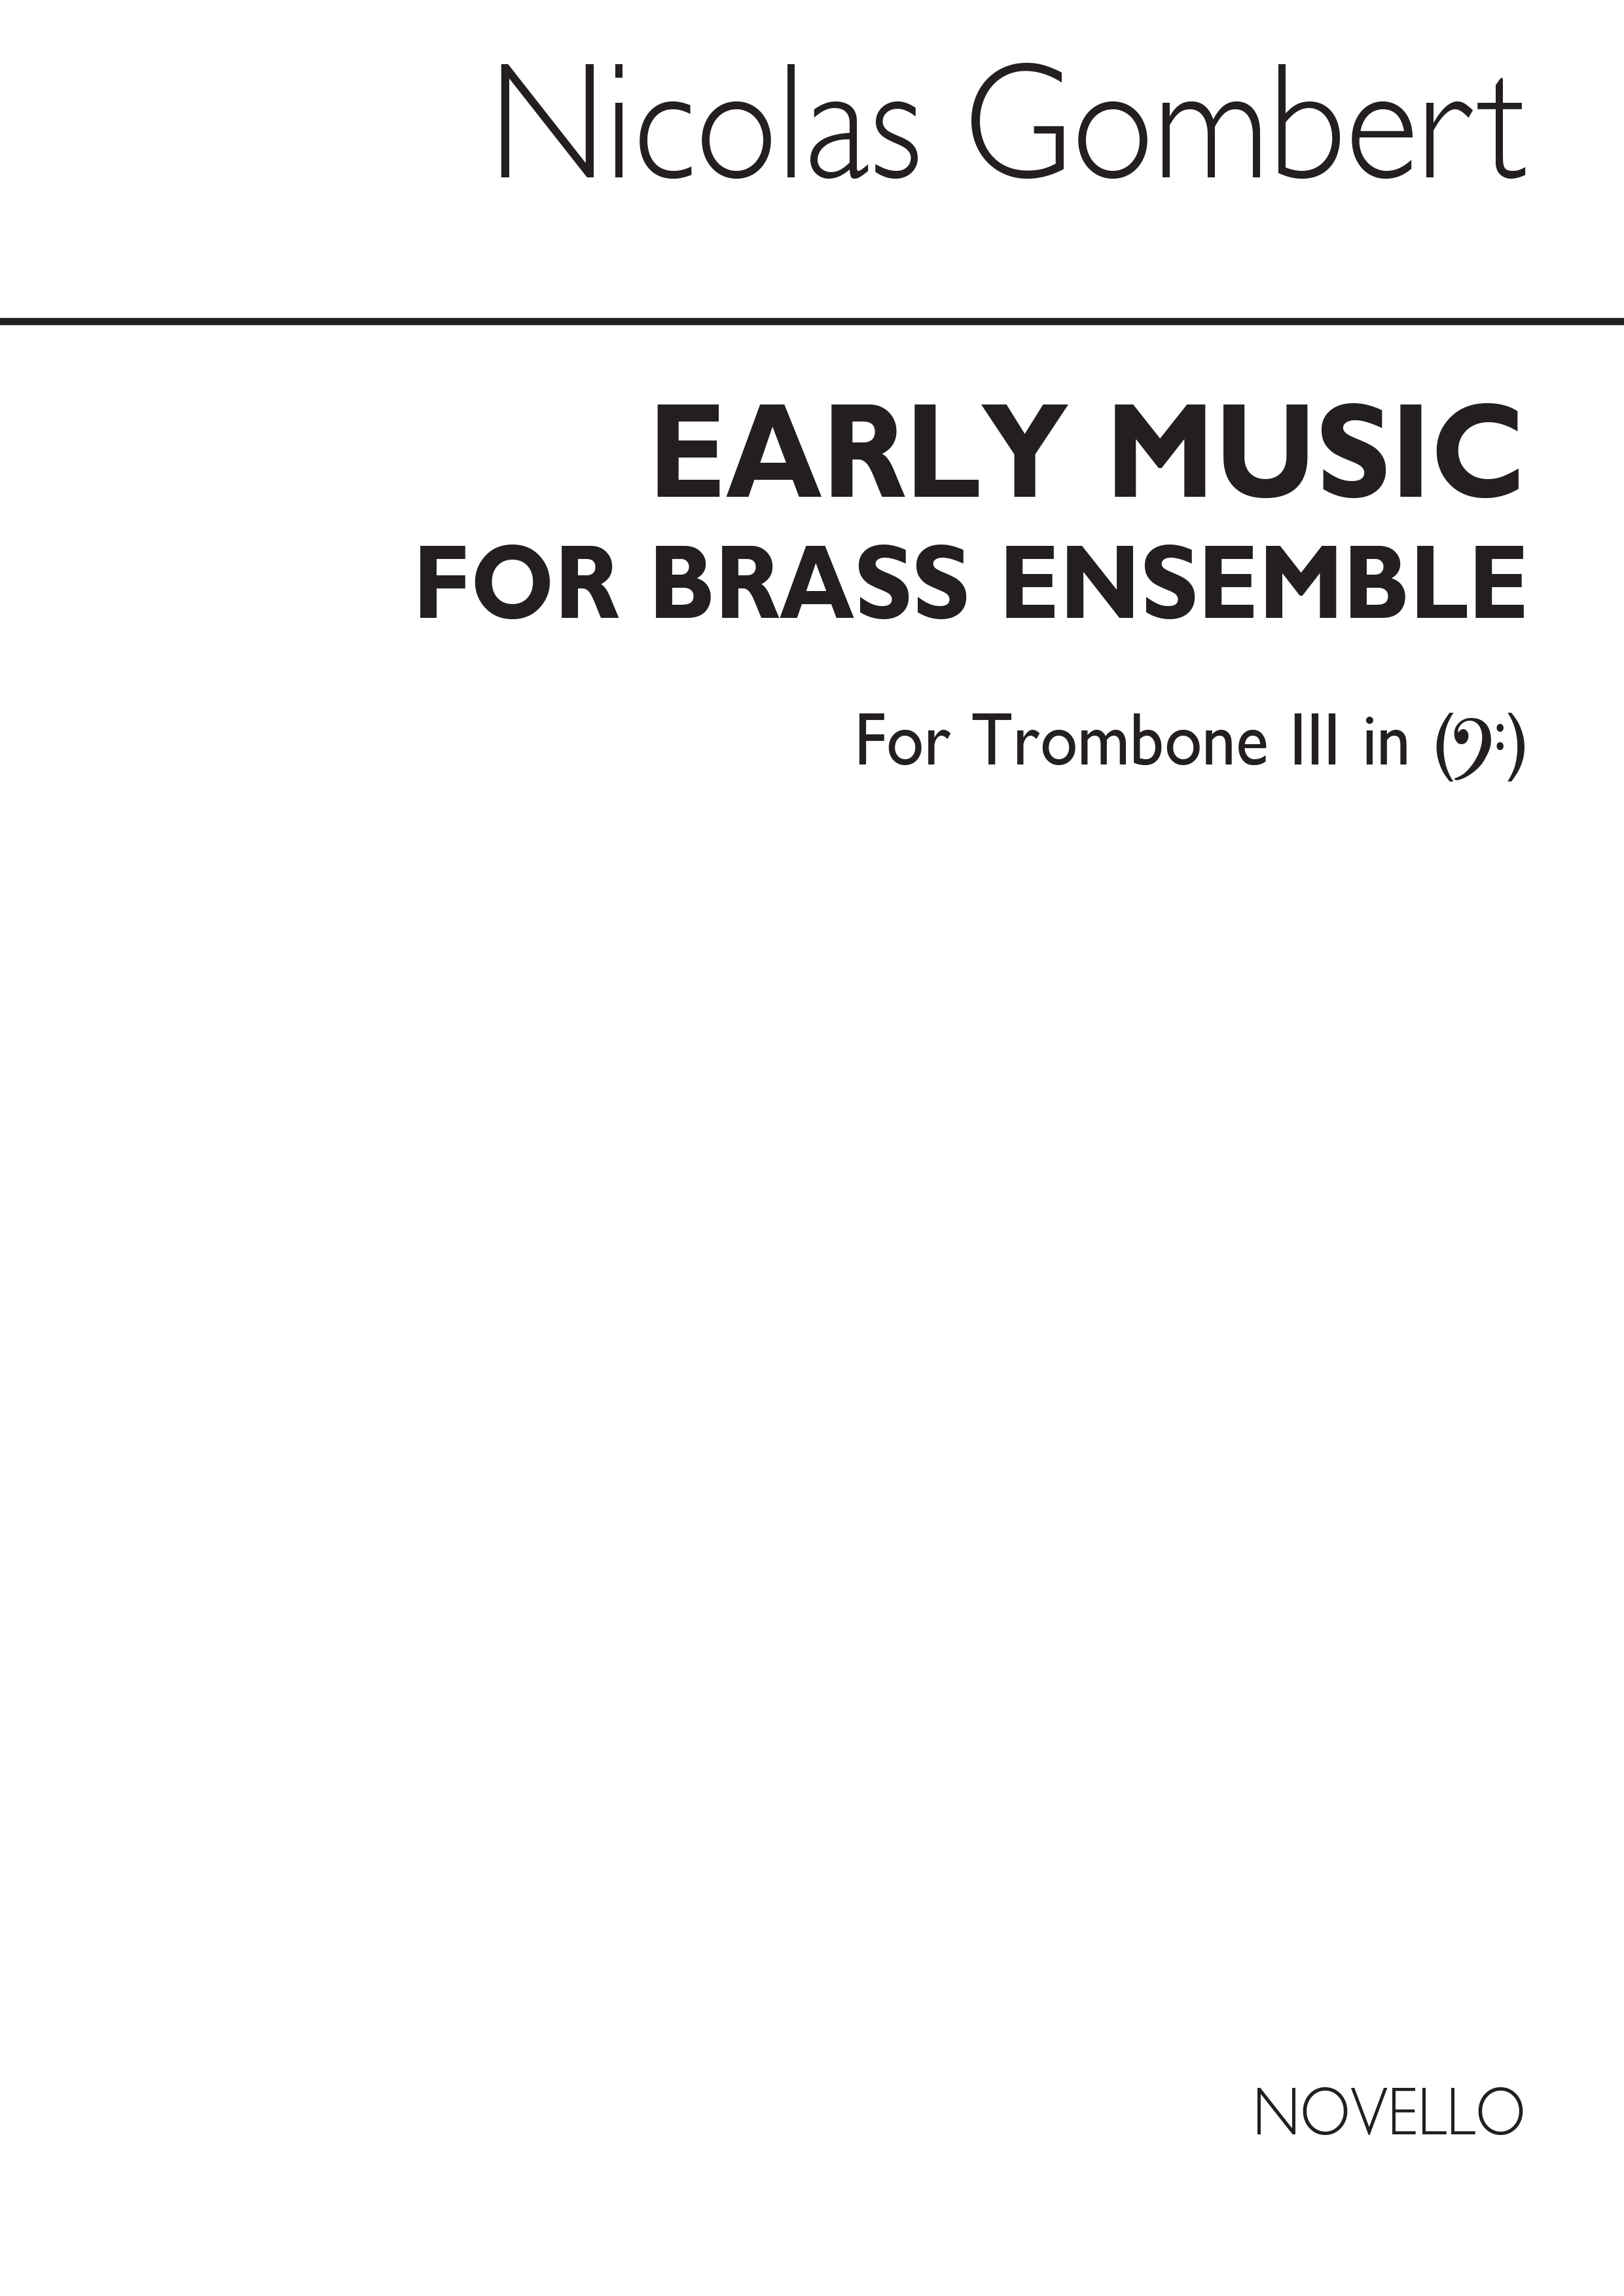 Lawson: Early Music For Brass Ensemble Tbn 3 Bc